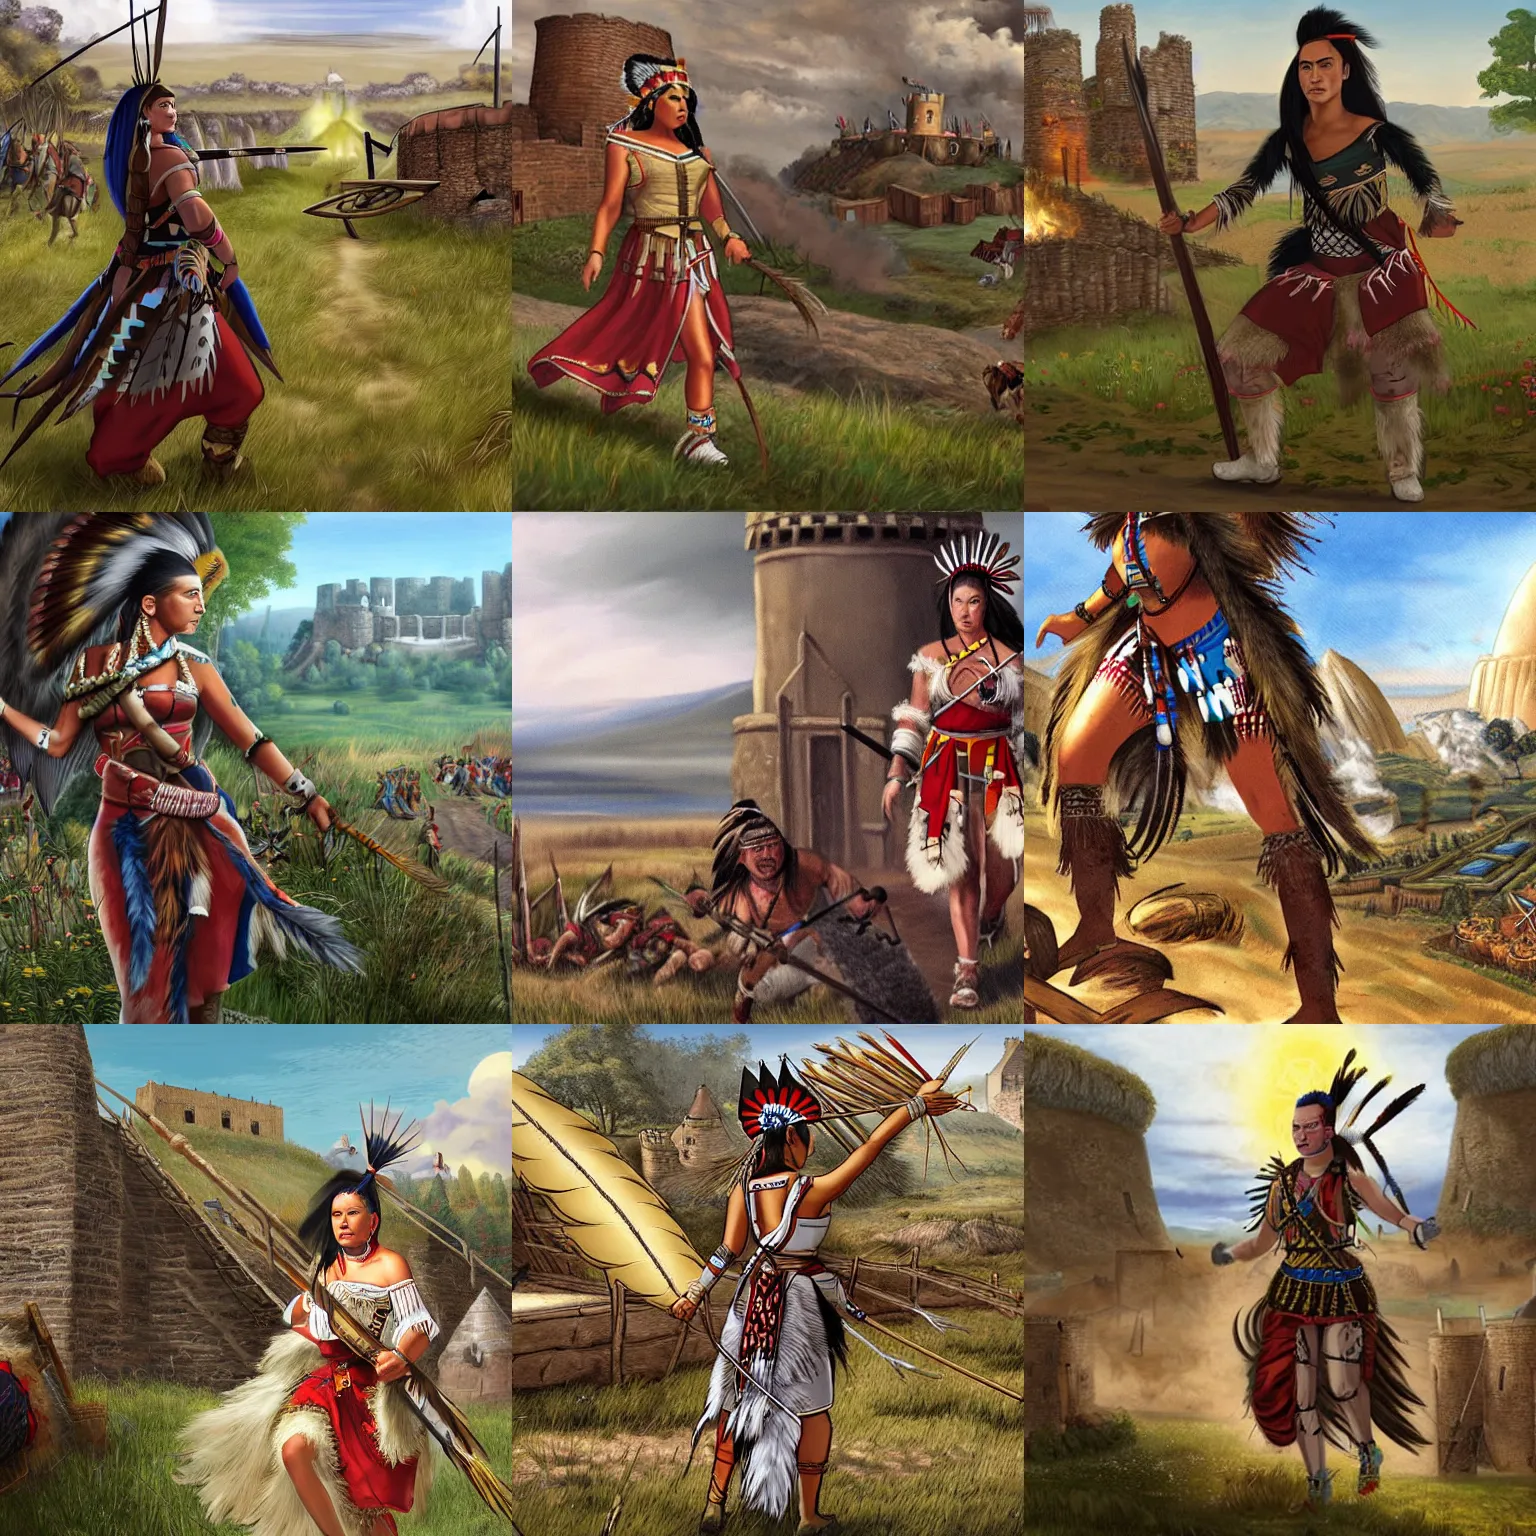 Prompt: A Native American Mohawk princess strides into a captured British fort, loading screen artwork for the game 'Europa Universalis 4'